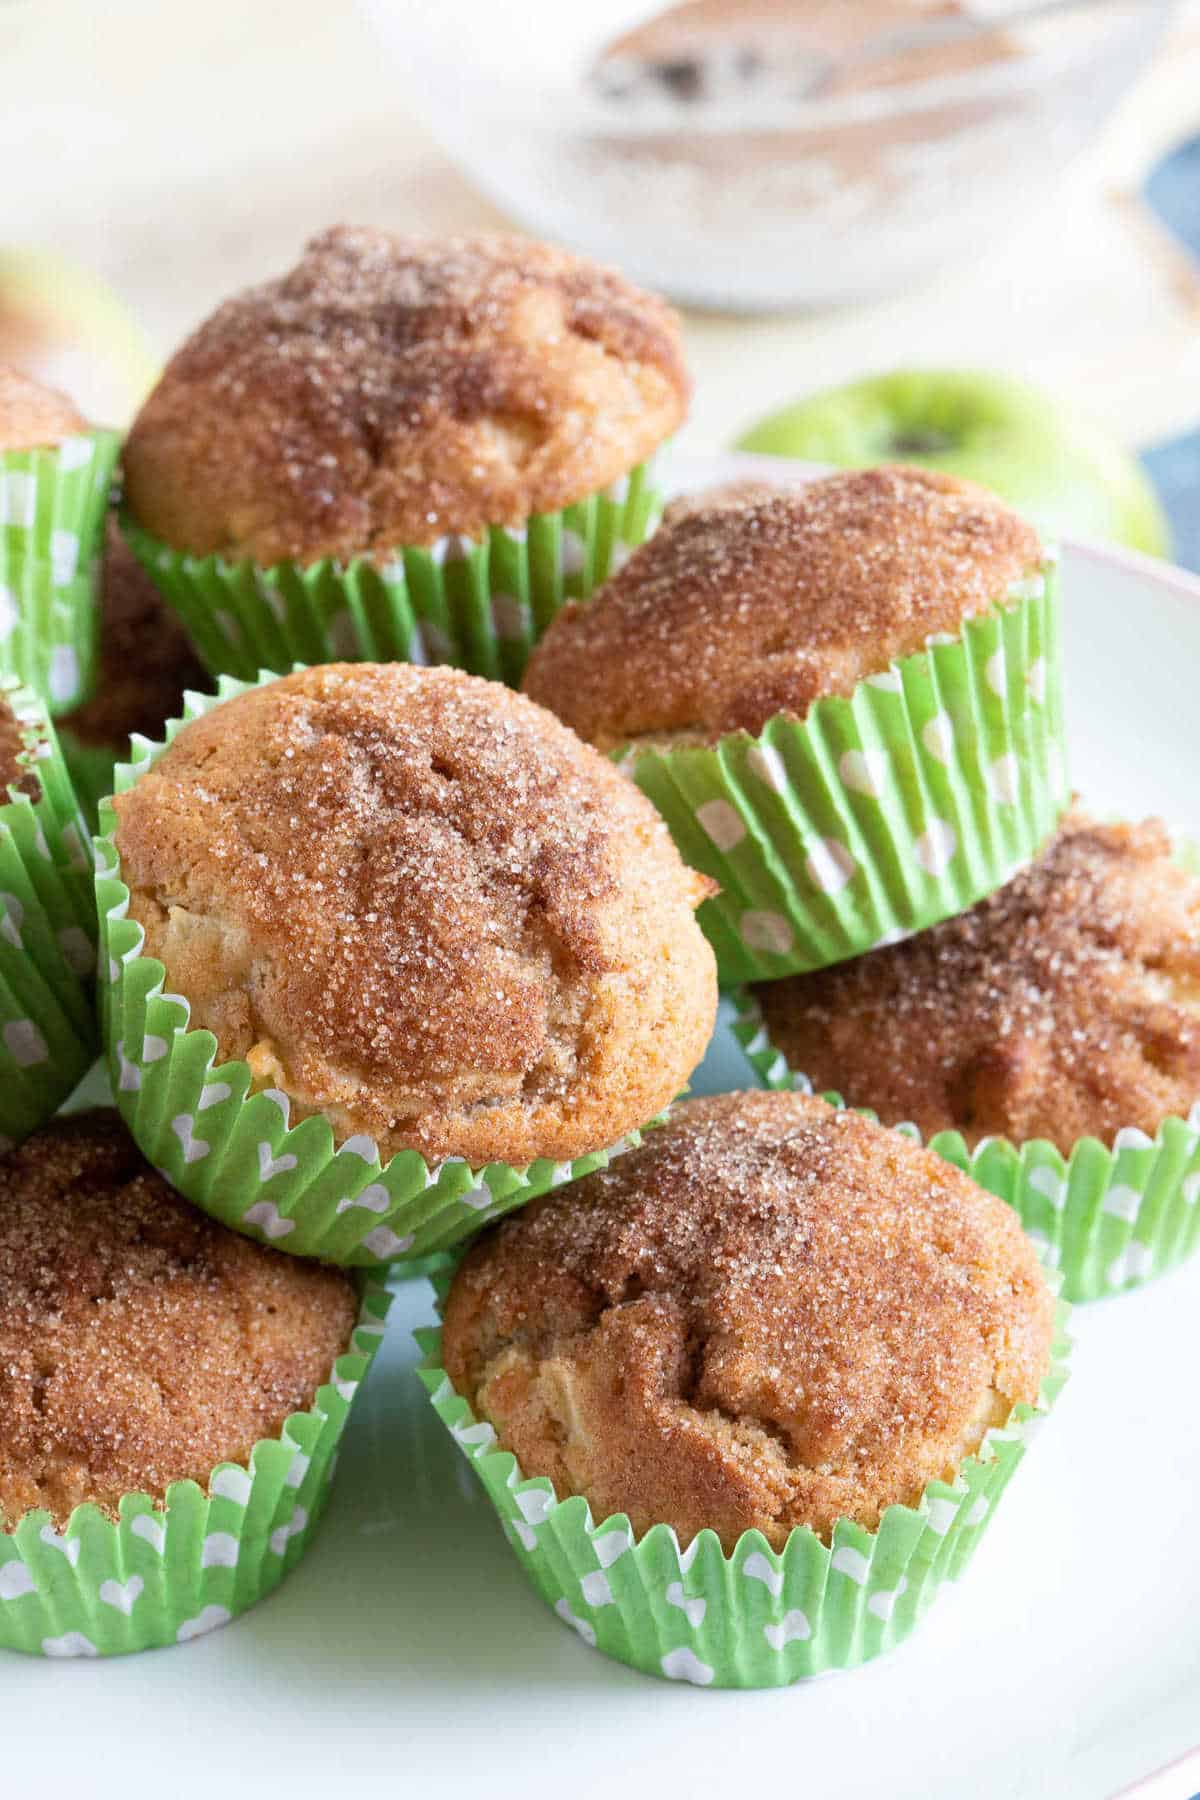 Cinnamon apple muffins on a cake stand.